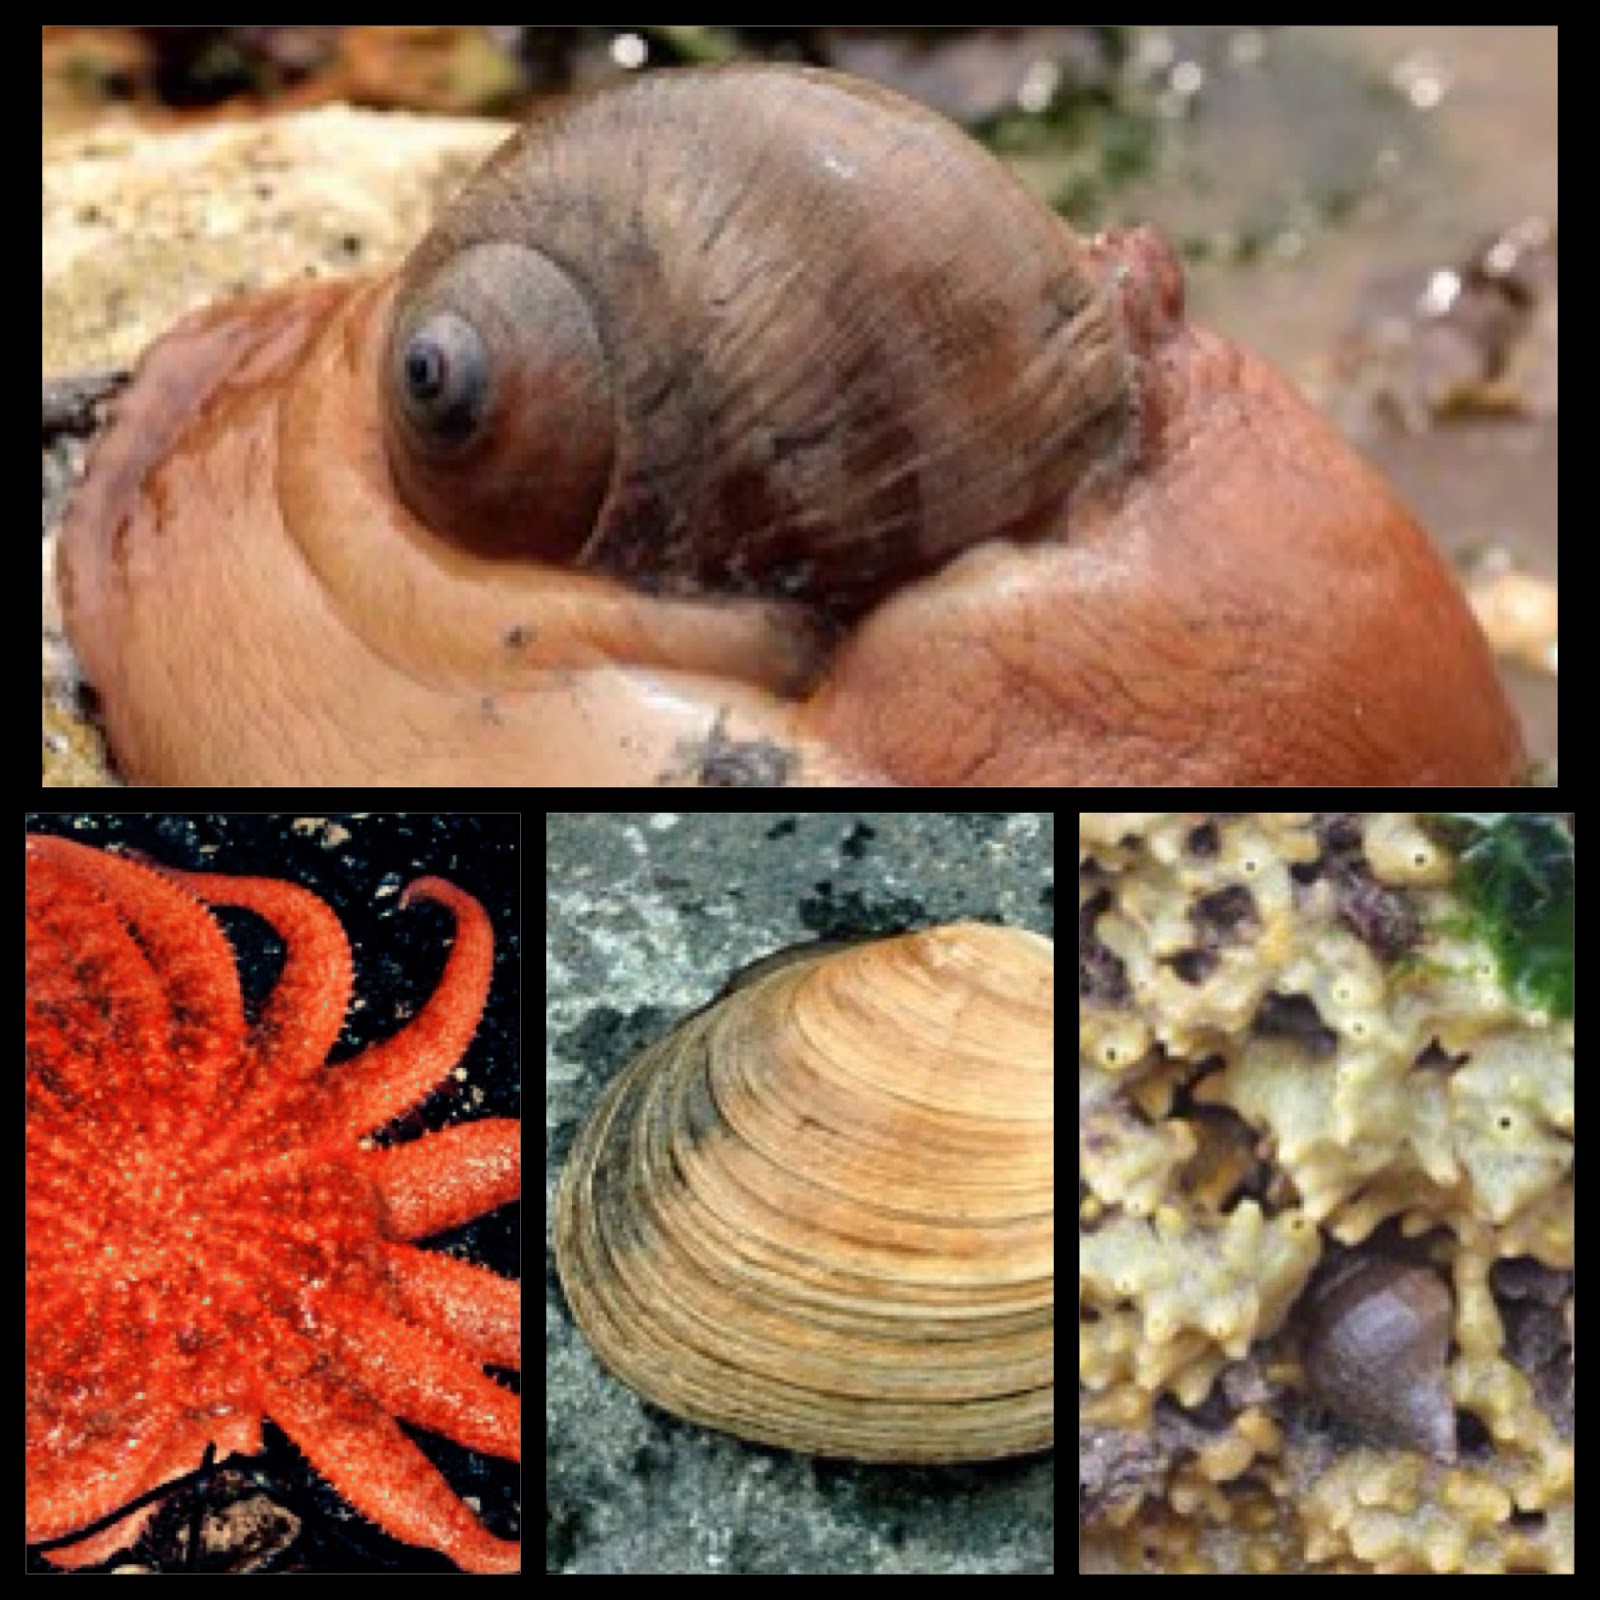 Four images: moon snail, sea star, clam, and snail in coral.